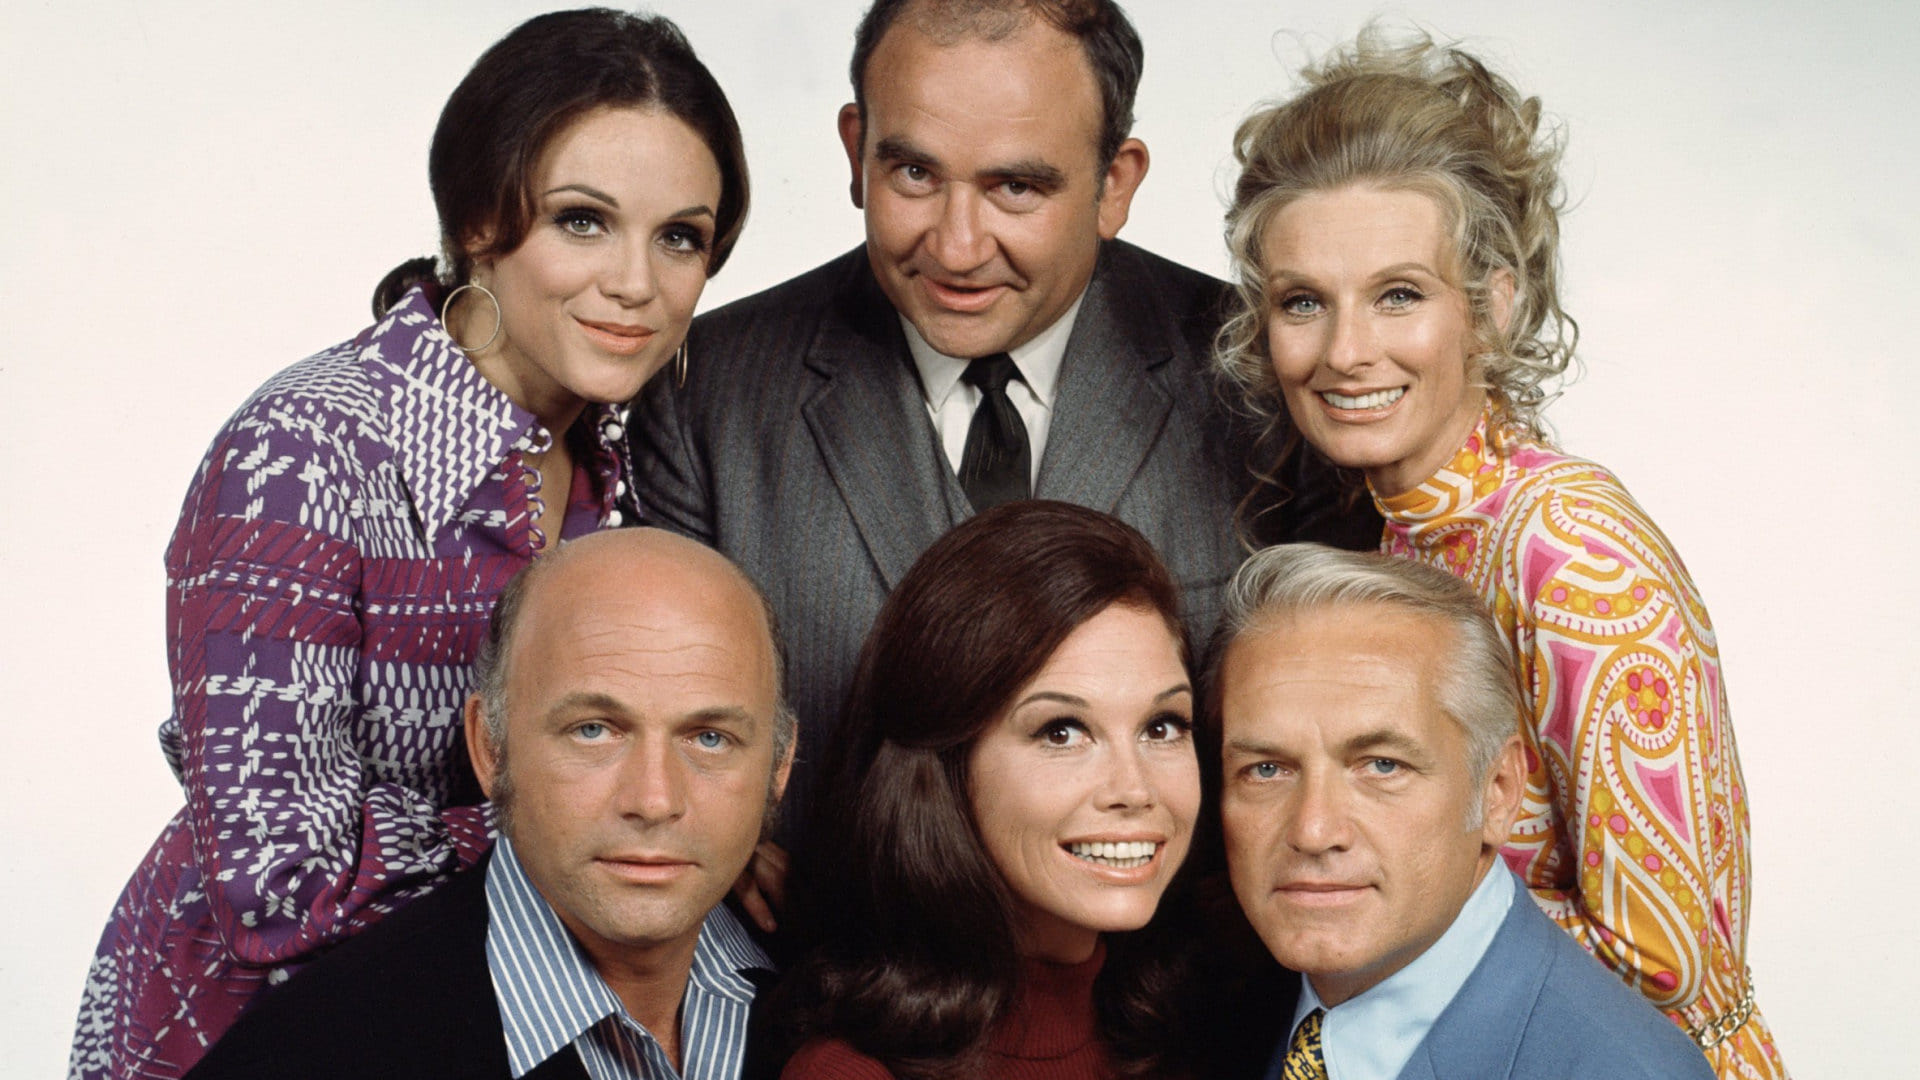 The Mary Tyler Moore Show (1977)